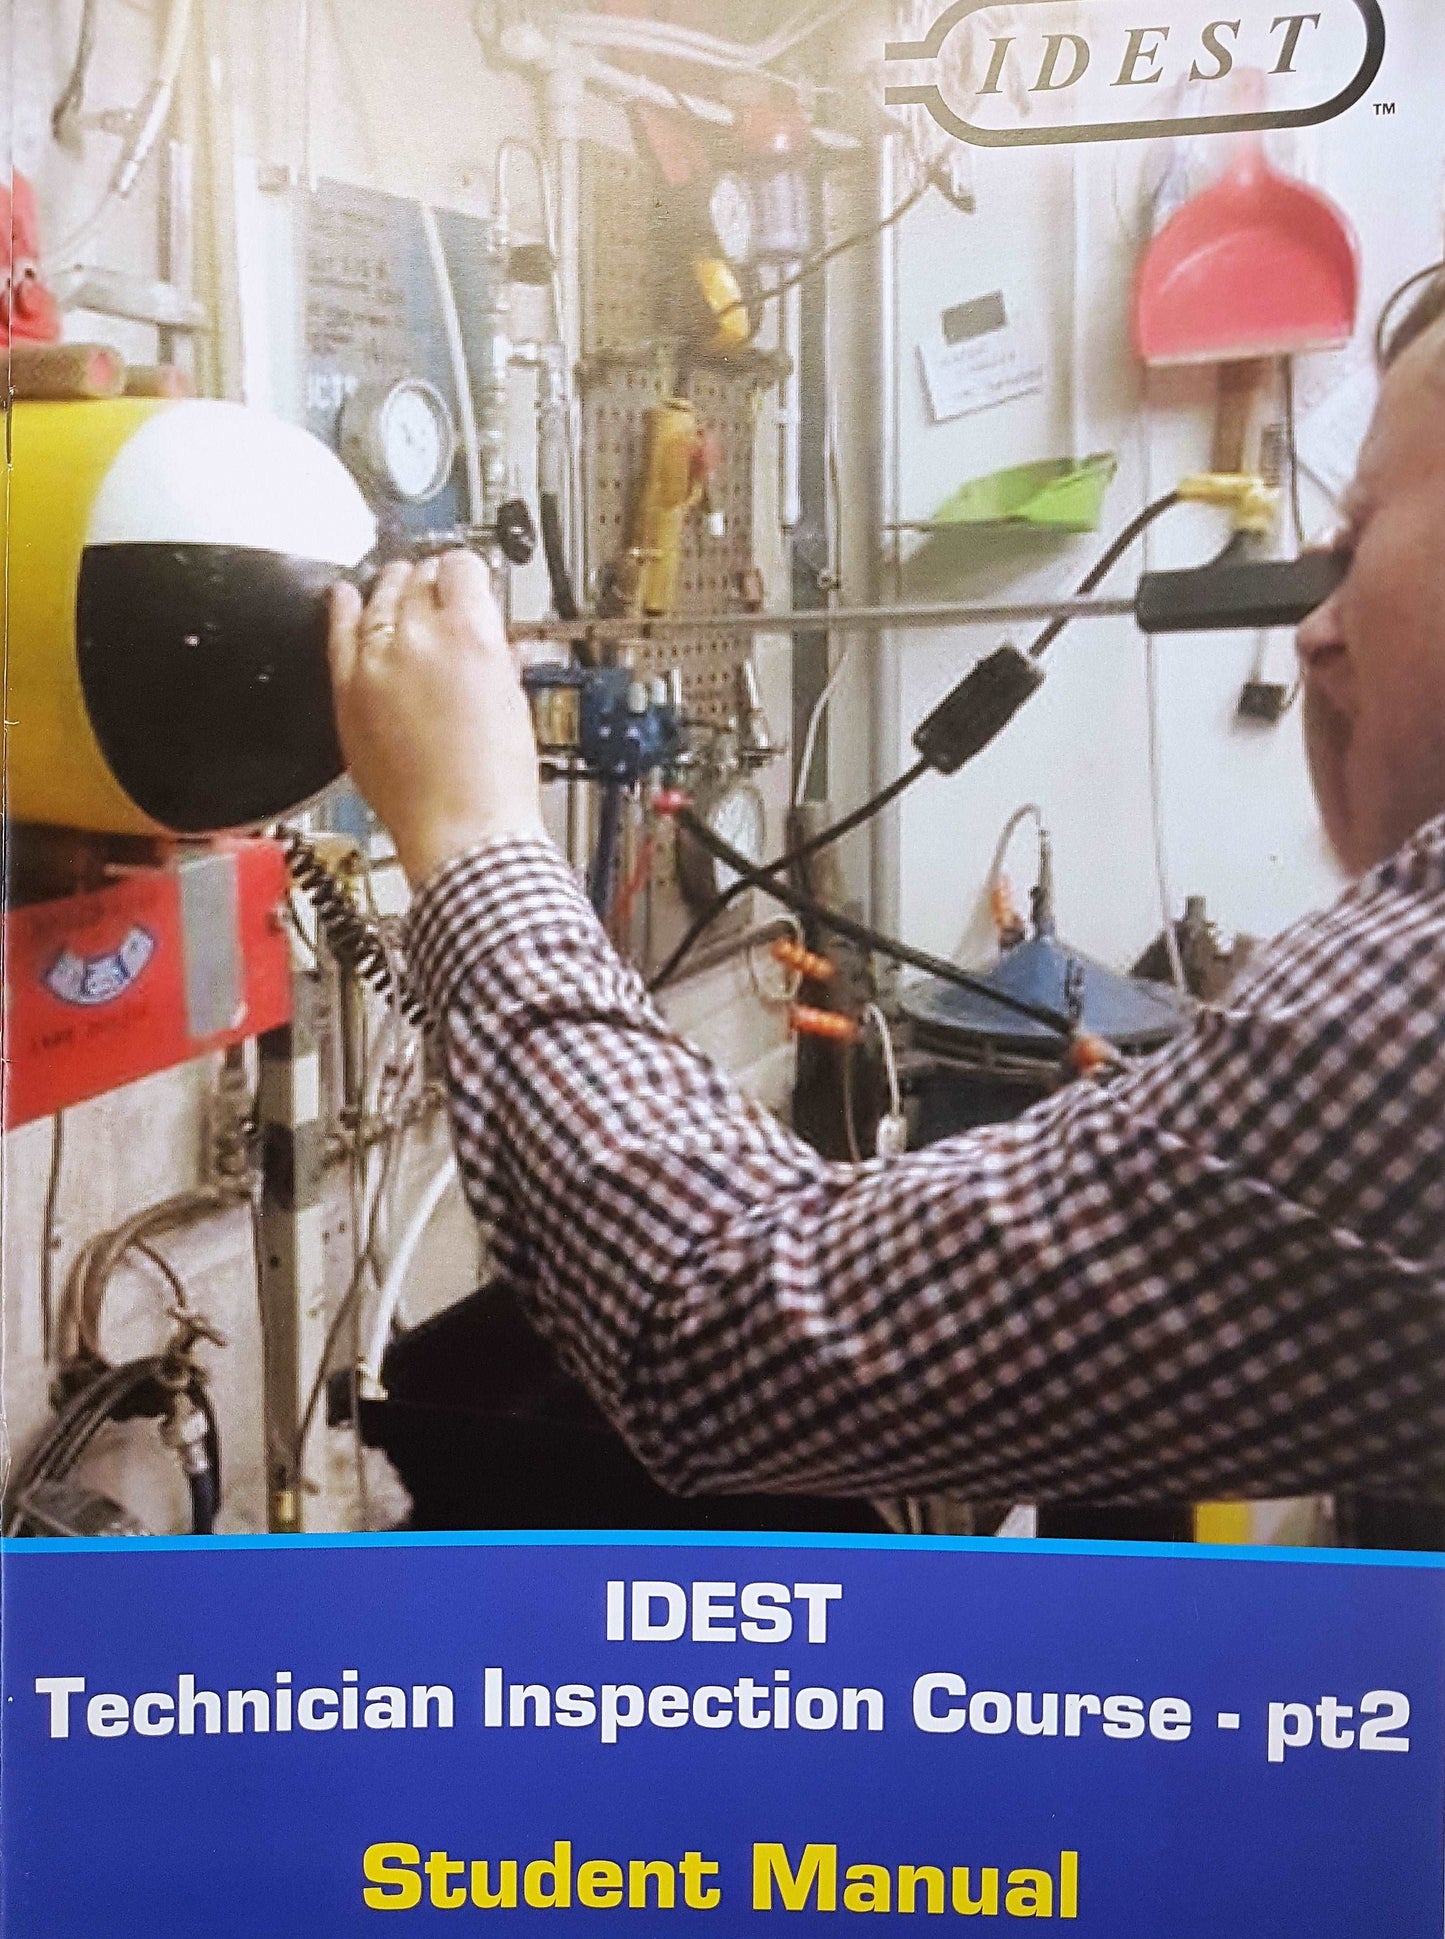 IDEST Hydrostatic Cylinder Inspection Course